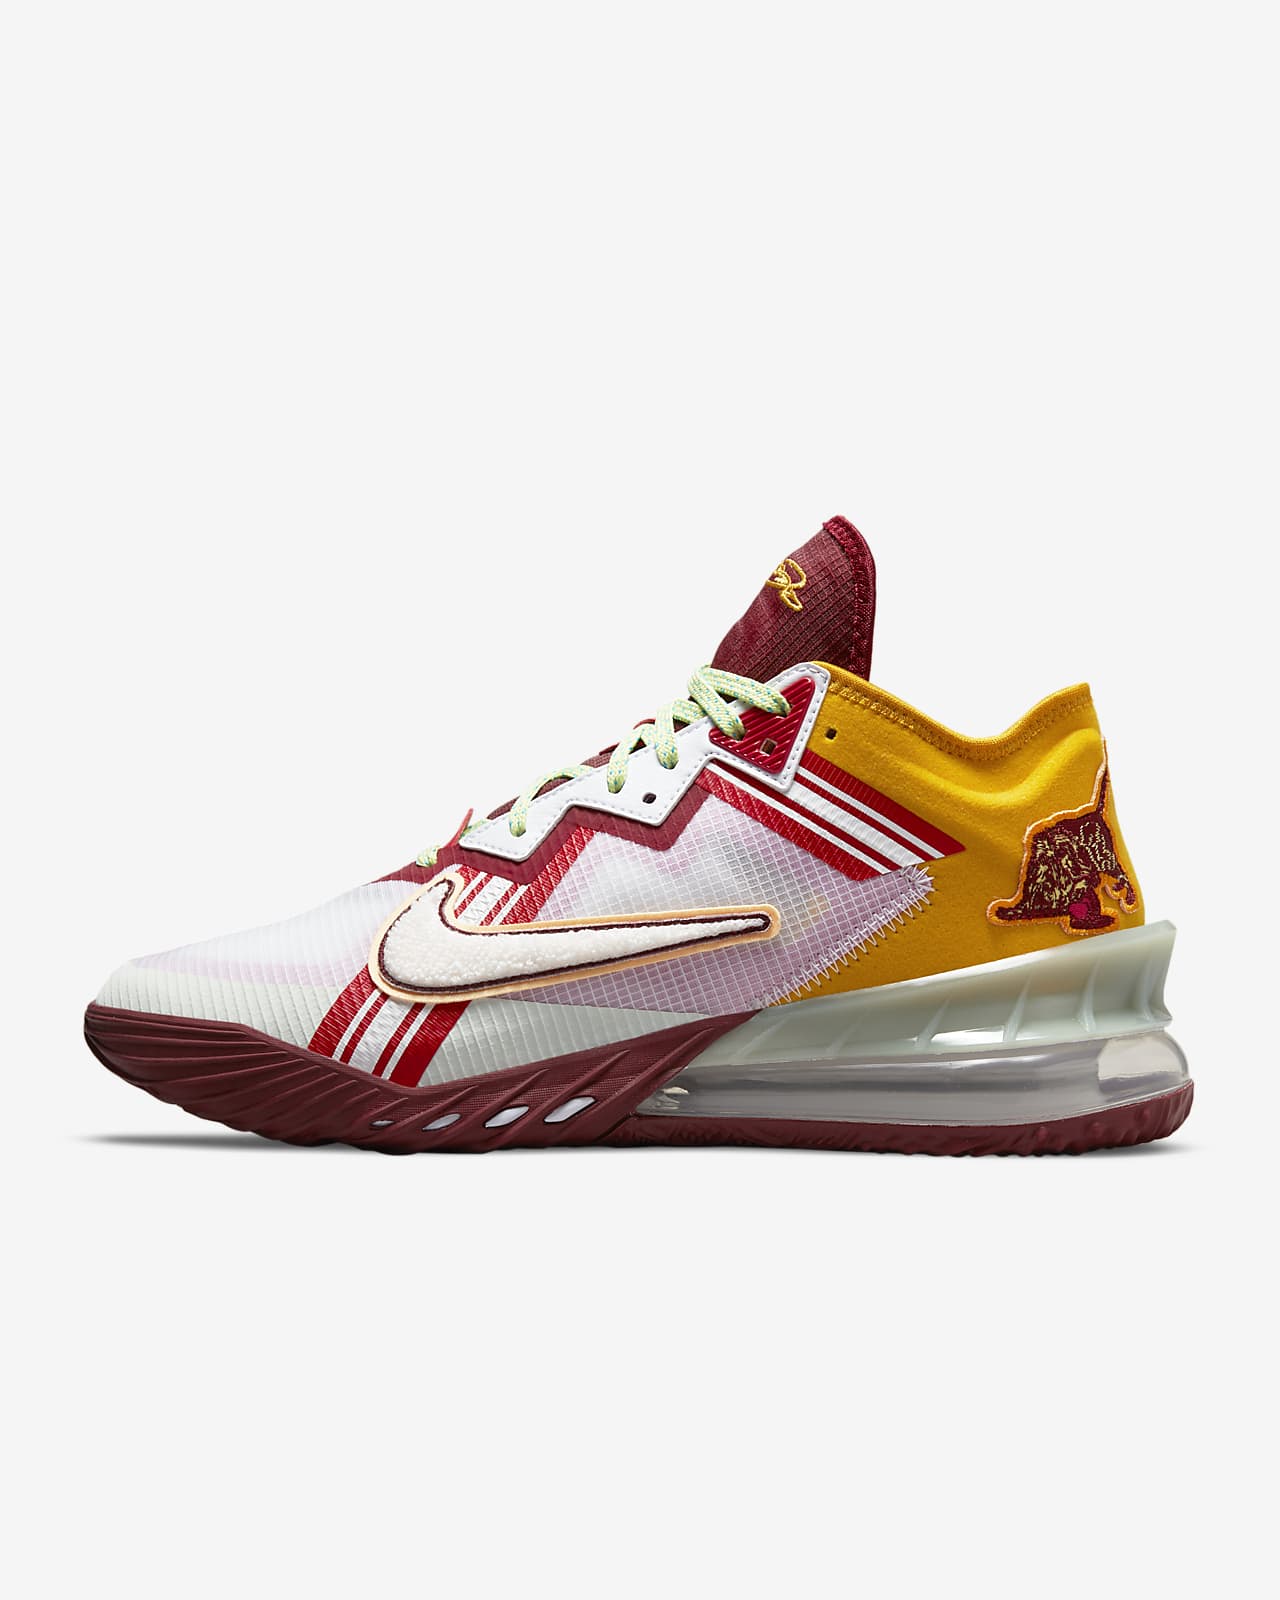 LeBron 18 Low x Mimi Plange 'Higher Learning' Basketball Shoes